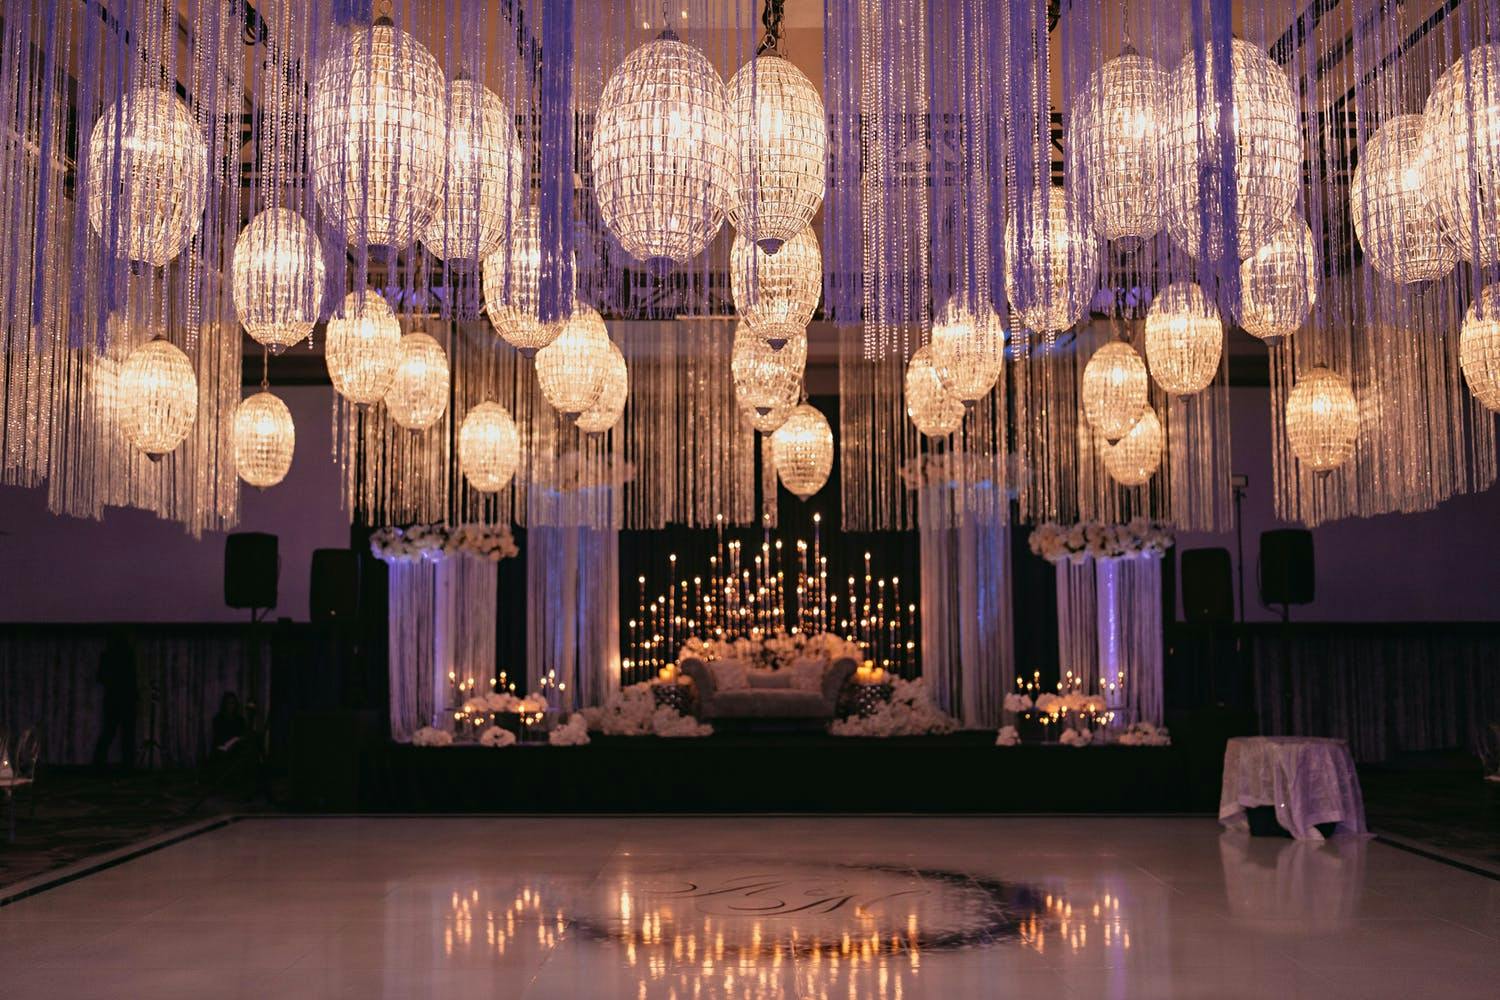 Wedding Ceiling Installation of Glass Orbed Chandeliers and Suspended Fringe and Crystal Tassels | PartySlate